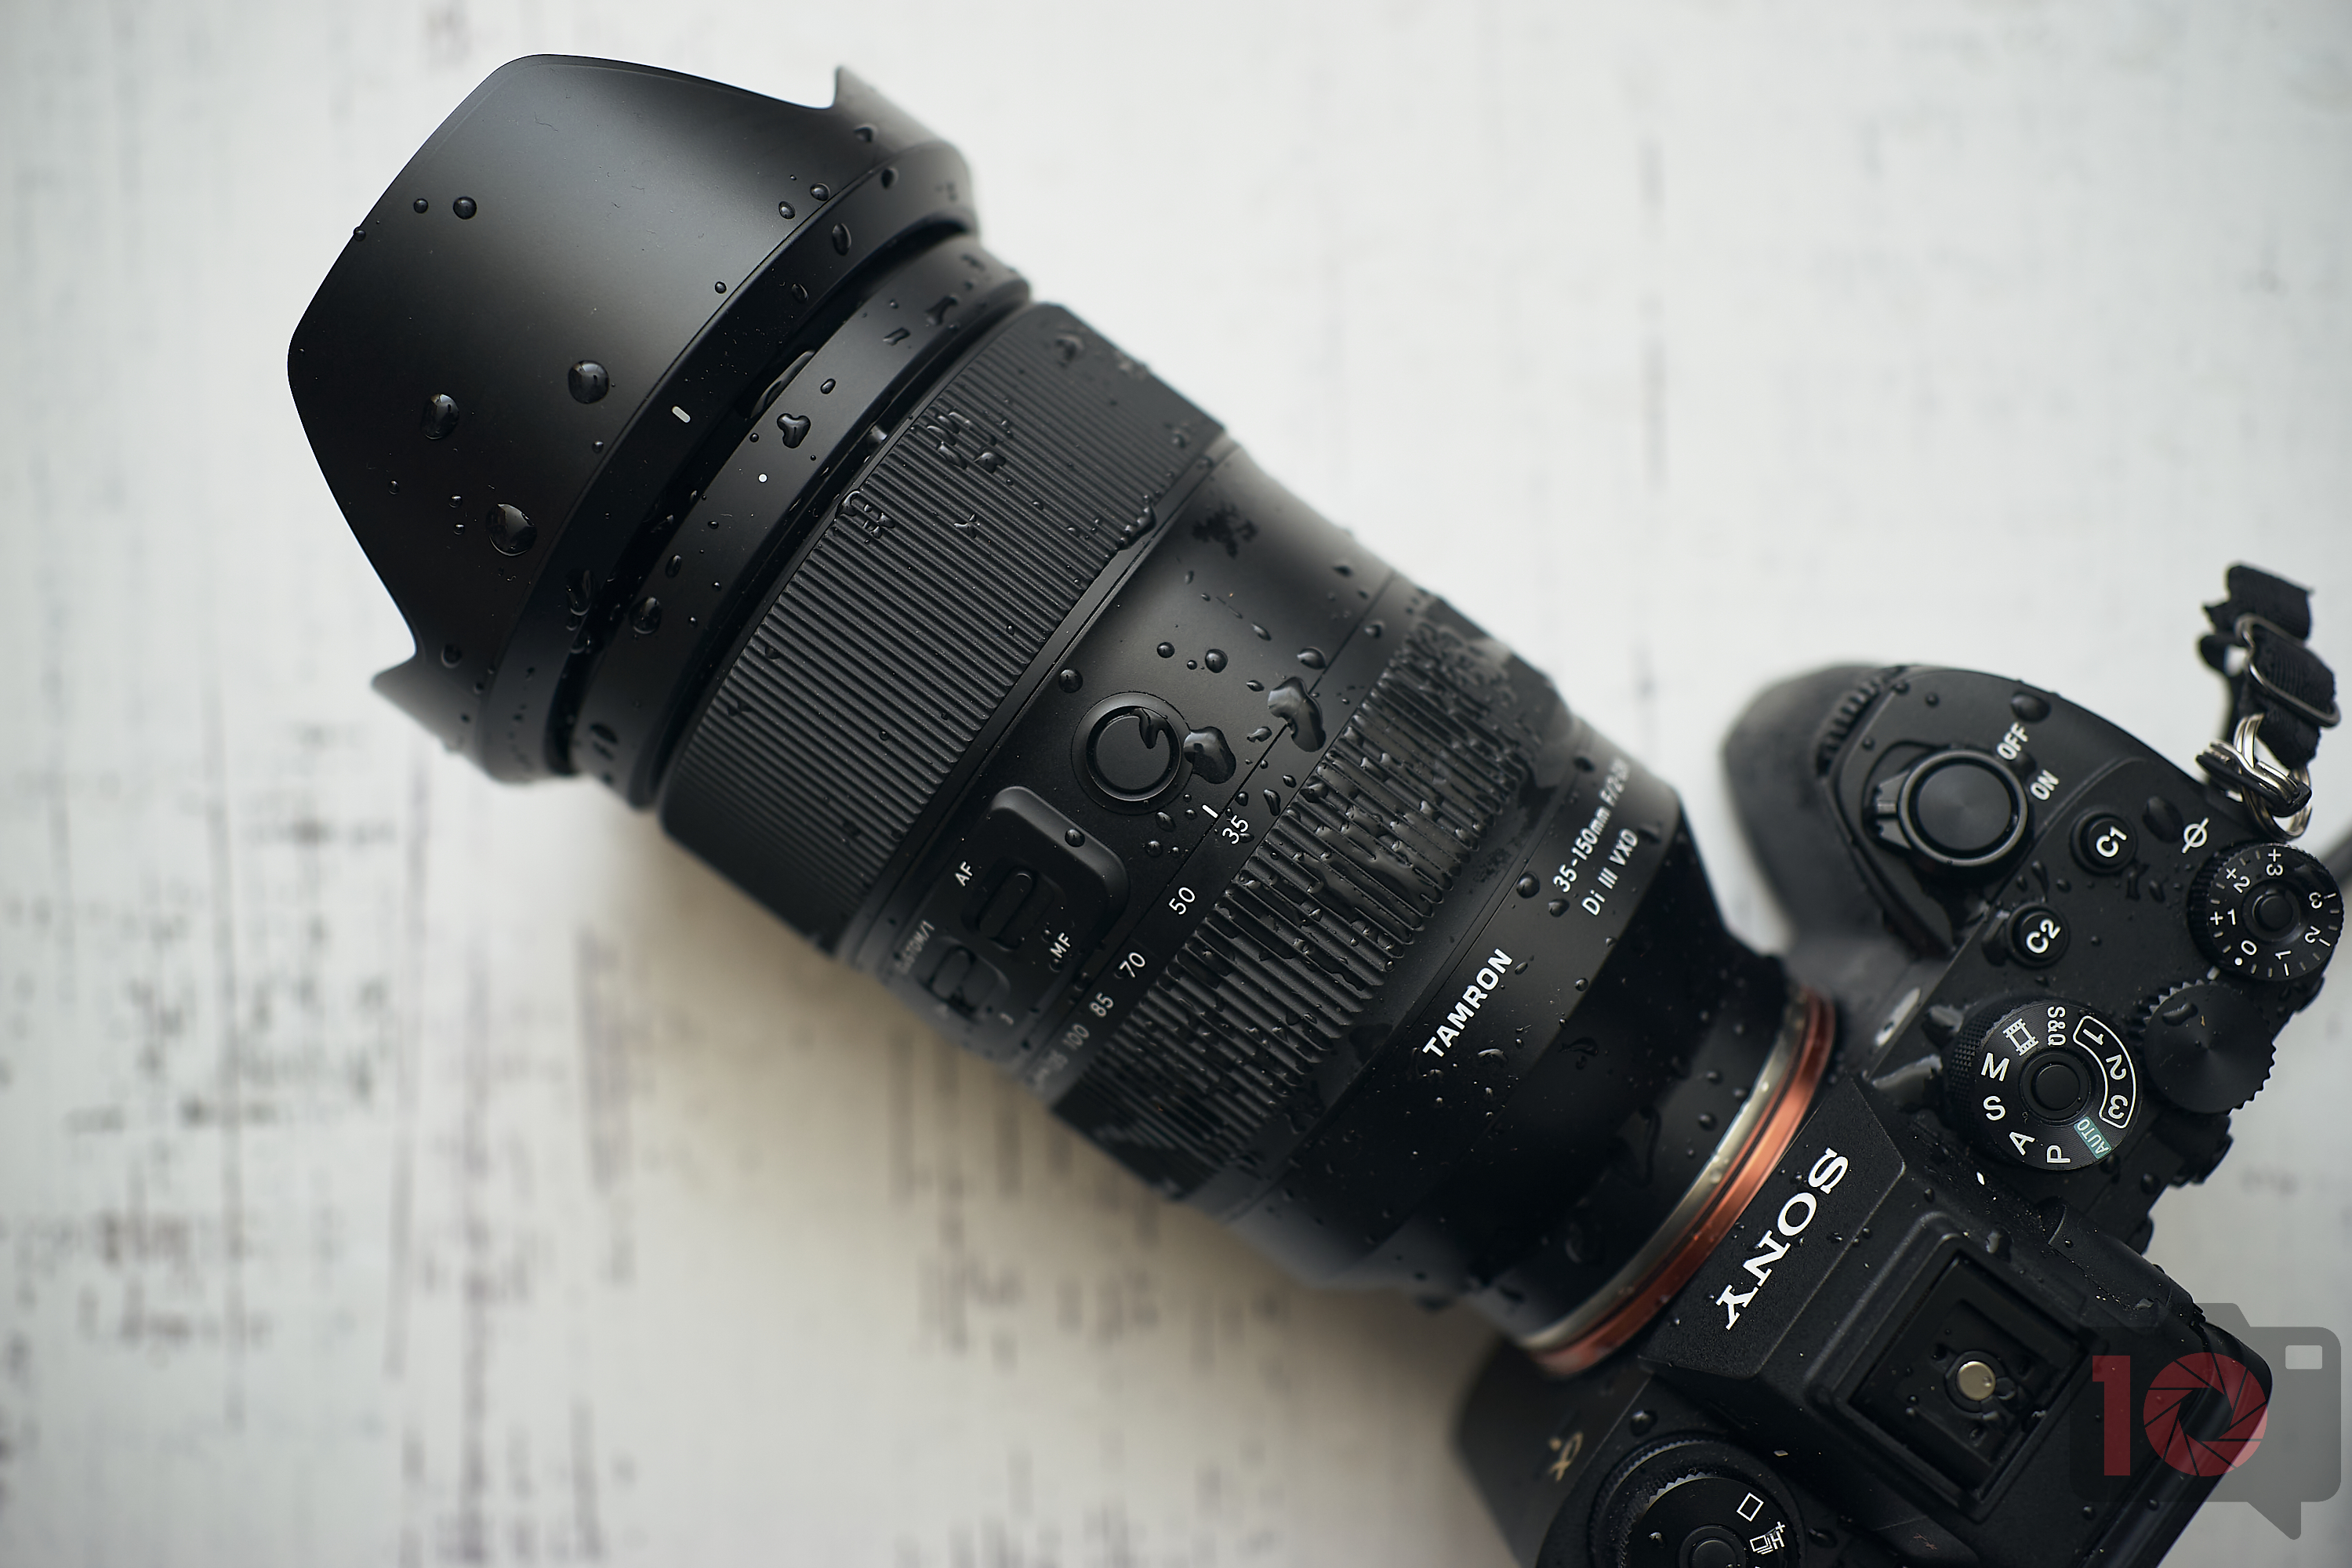 Chris Gampat The Phoblographer Tamron 35-150mm f2-2.8 review product images 2.81-125s100